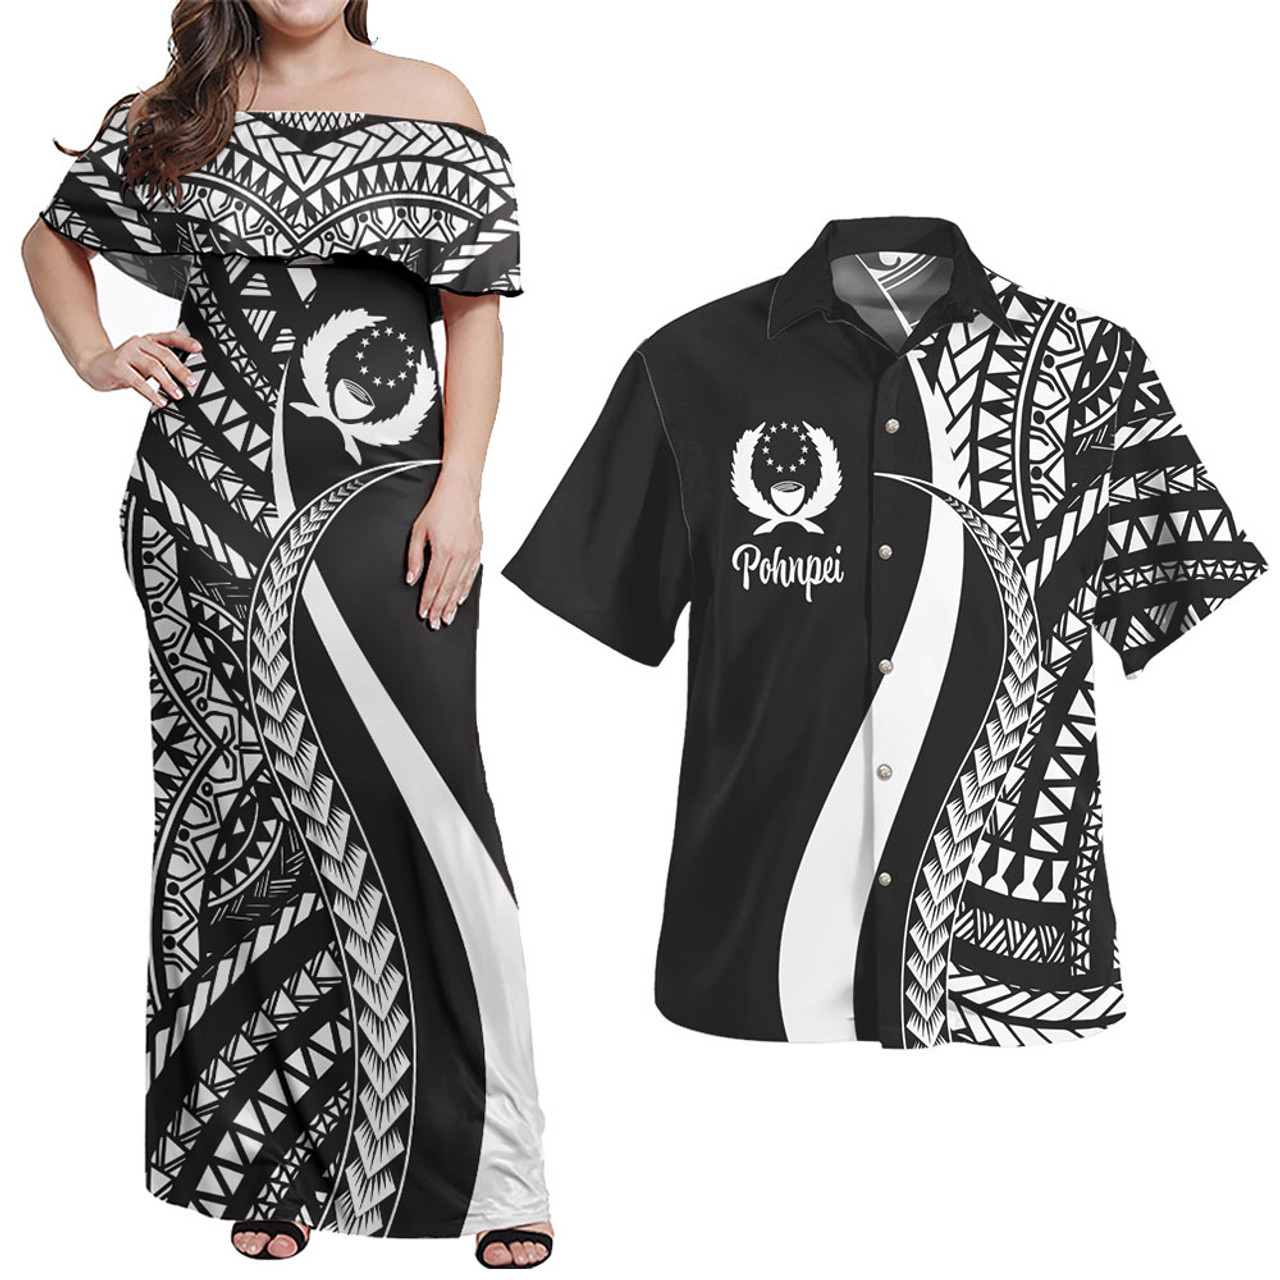 Pohnpei Combo Dress And Shirt - Micronesian Tentacle Tribal Pattern White